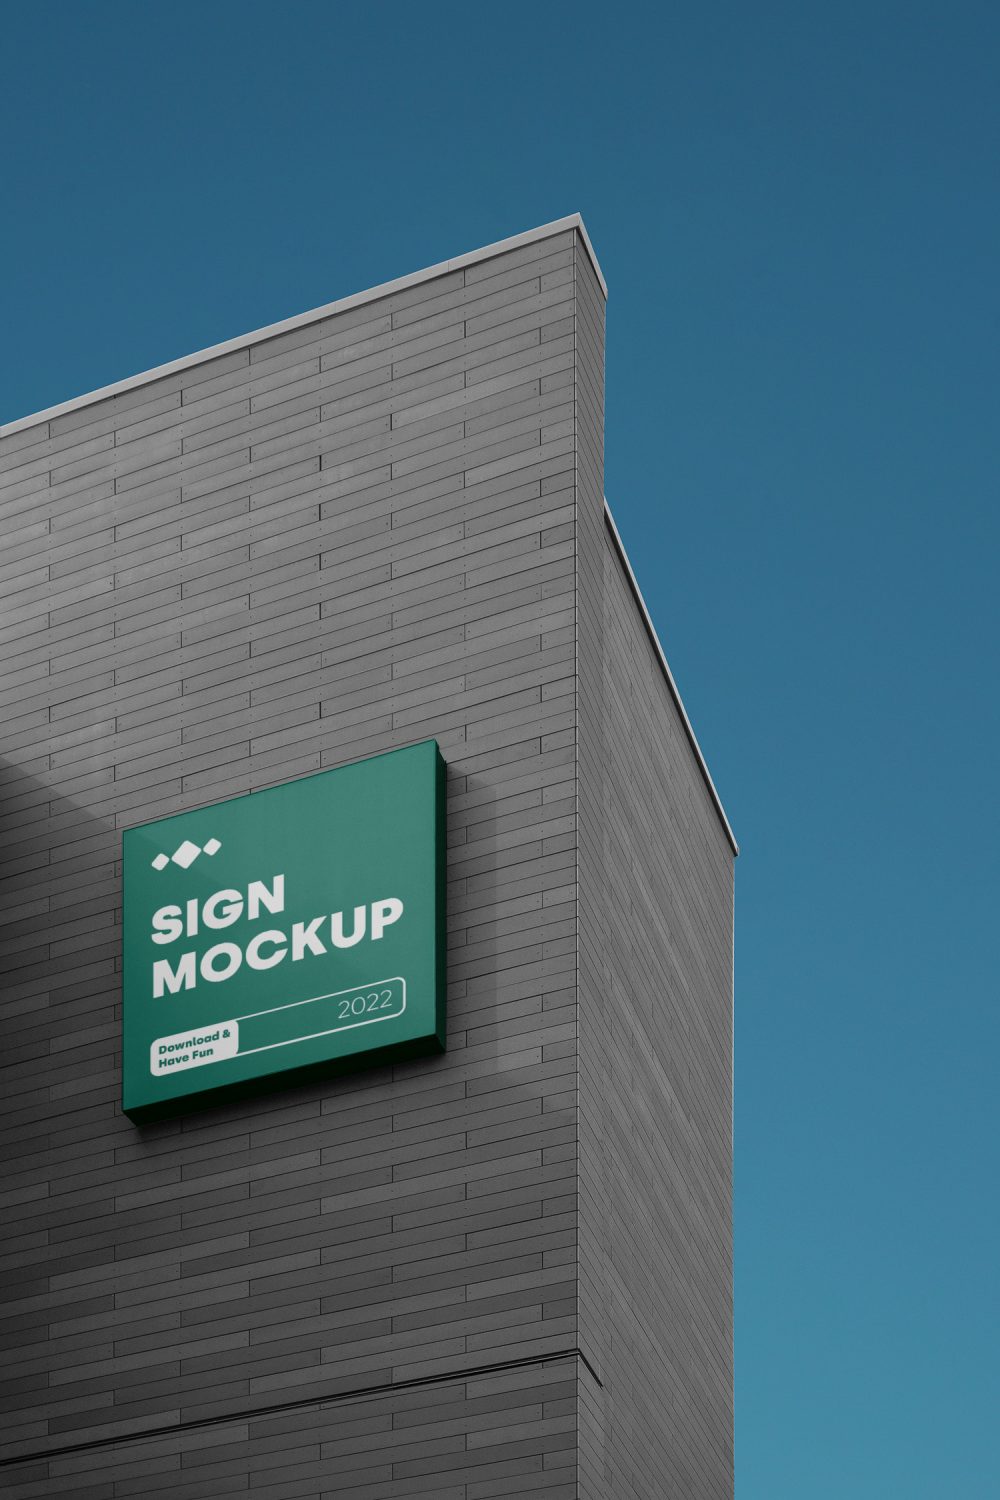 Sign on the Building Mockup